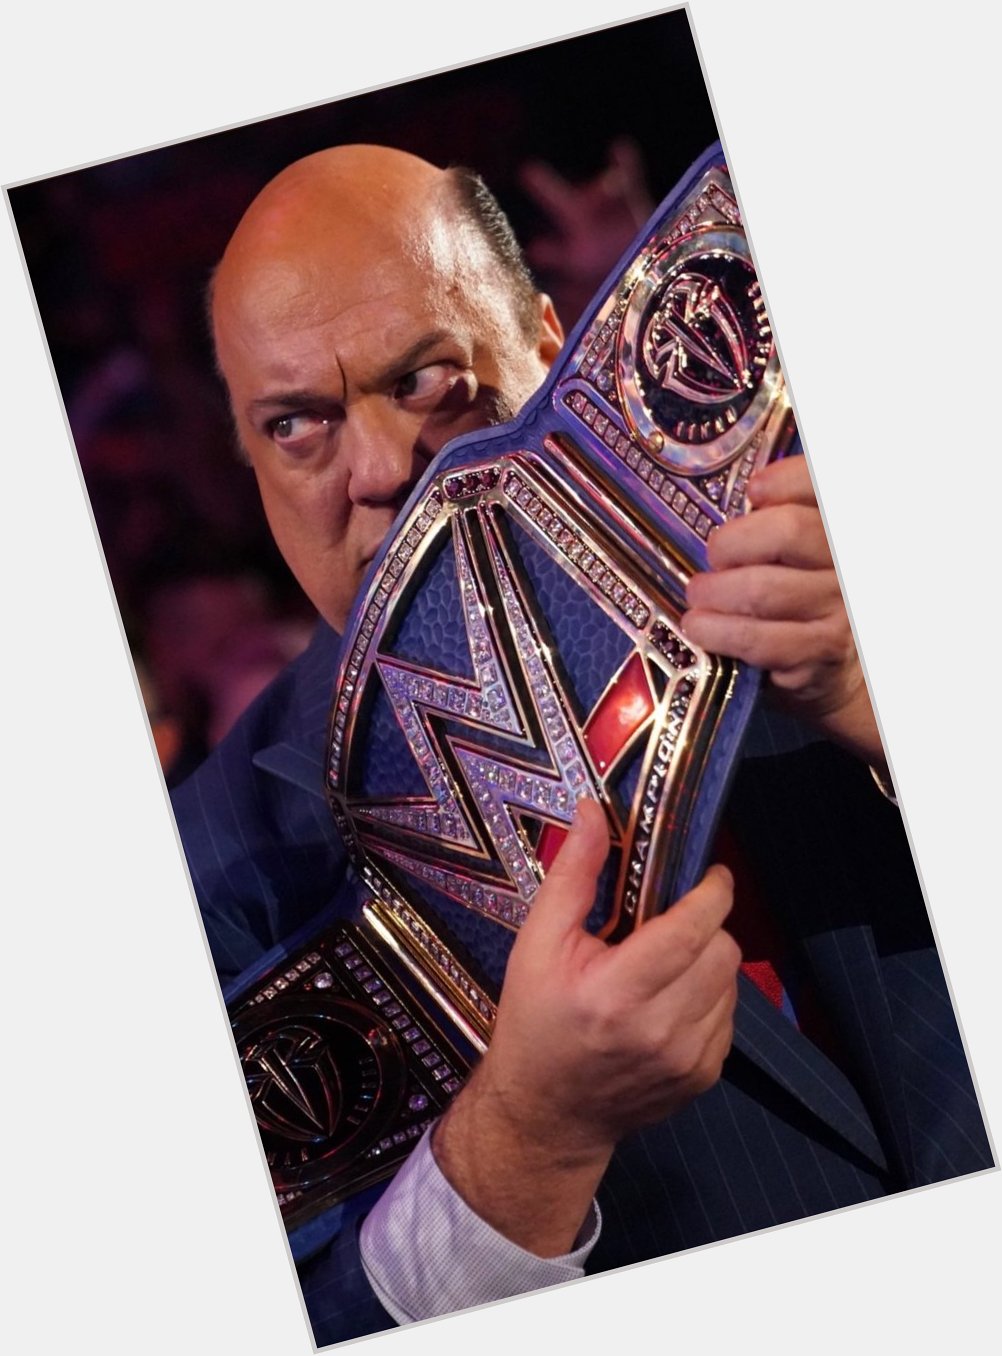  Happy Birthday To The G.O.A.T Paul Heyman....
Then Now Forever 